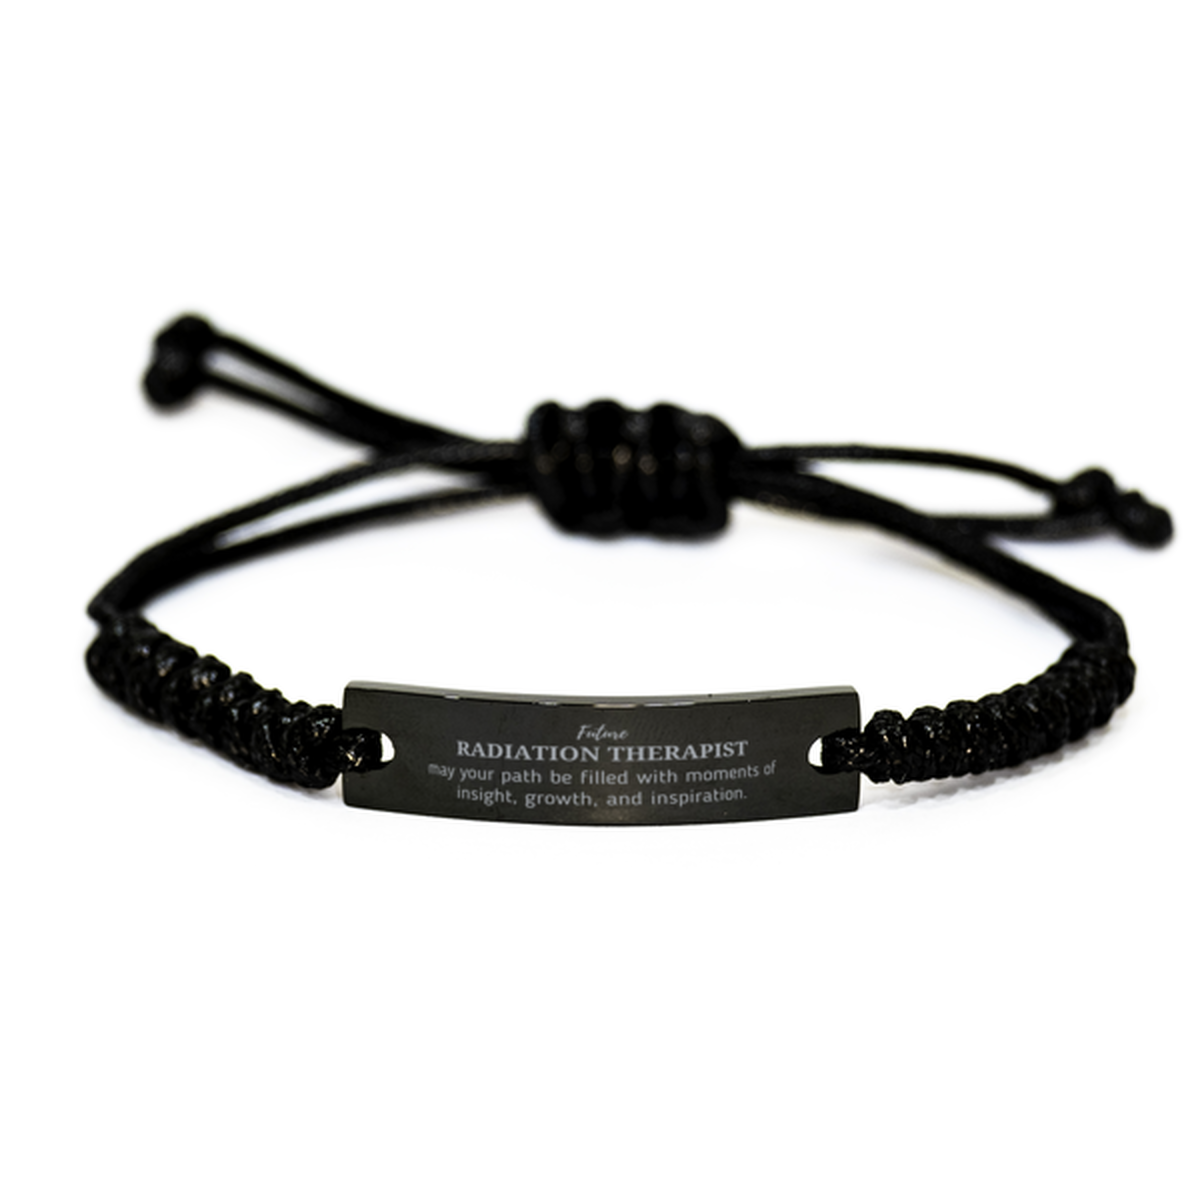 Future Radiation Therapist Gifts, May your path be filled with moments of insight, Graduation Gifts for New Radiation Therapist, Christmas Unique Black Rope Bracelet For Men, Women, Friends